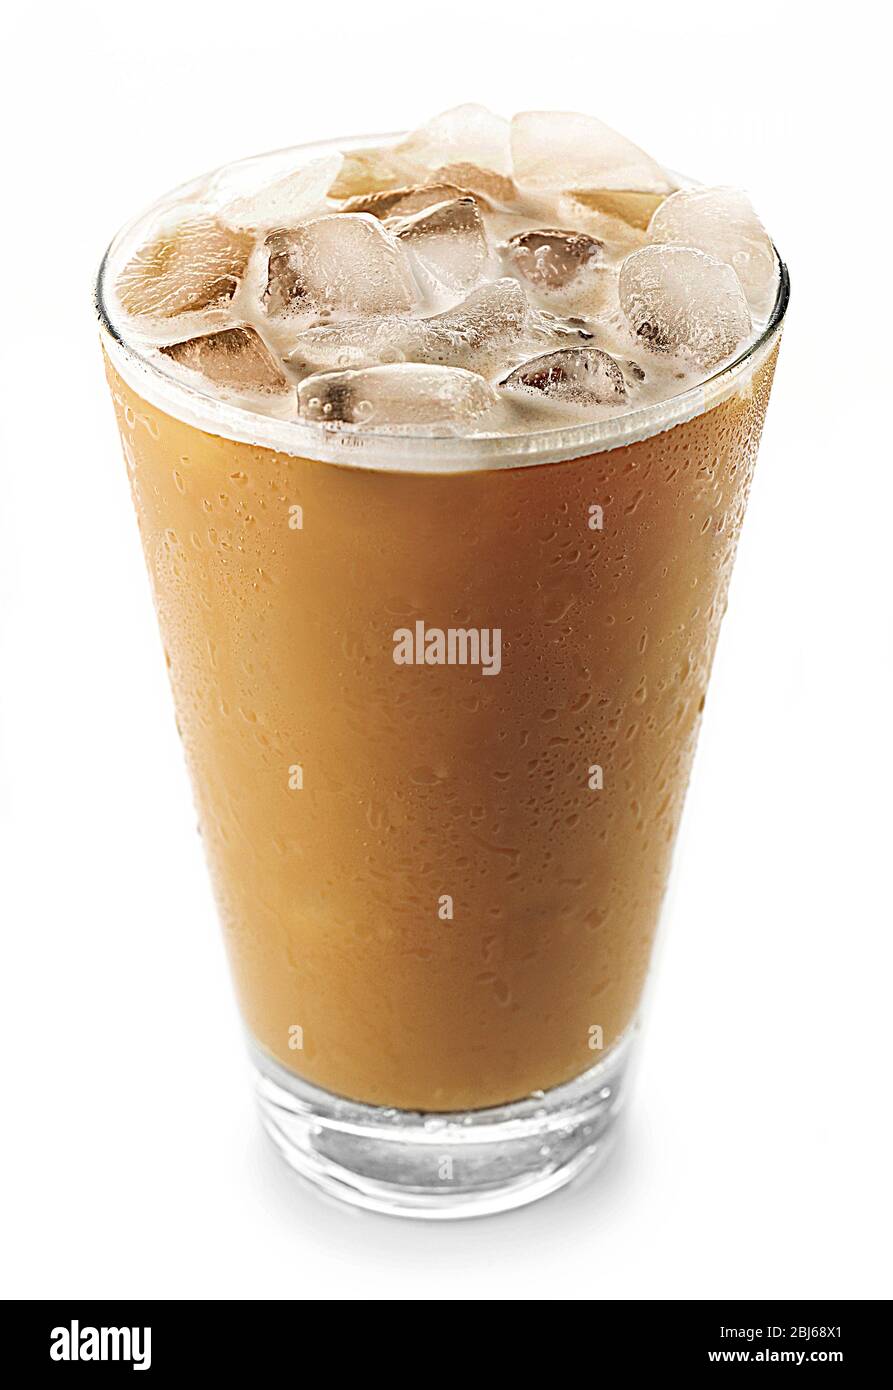 https://c8.alamy.com/comp/2BJ68X1/cup-of-ice-coffee-isolated-on-white-2BJ68X1.jpg